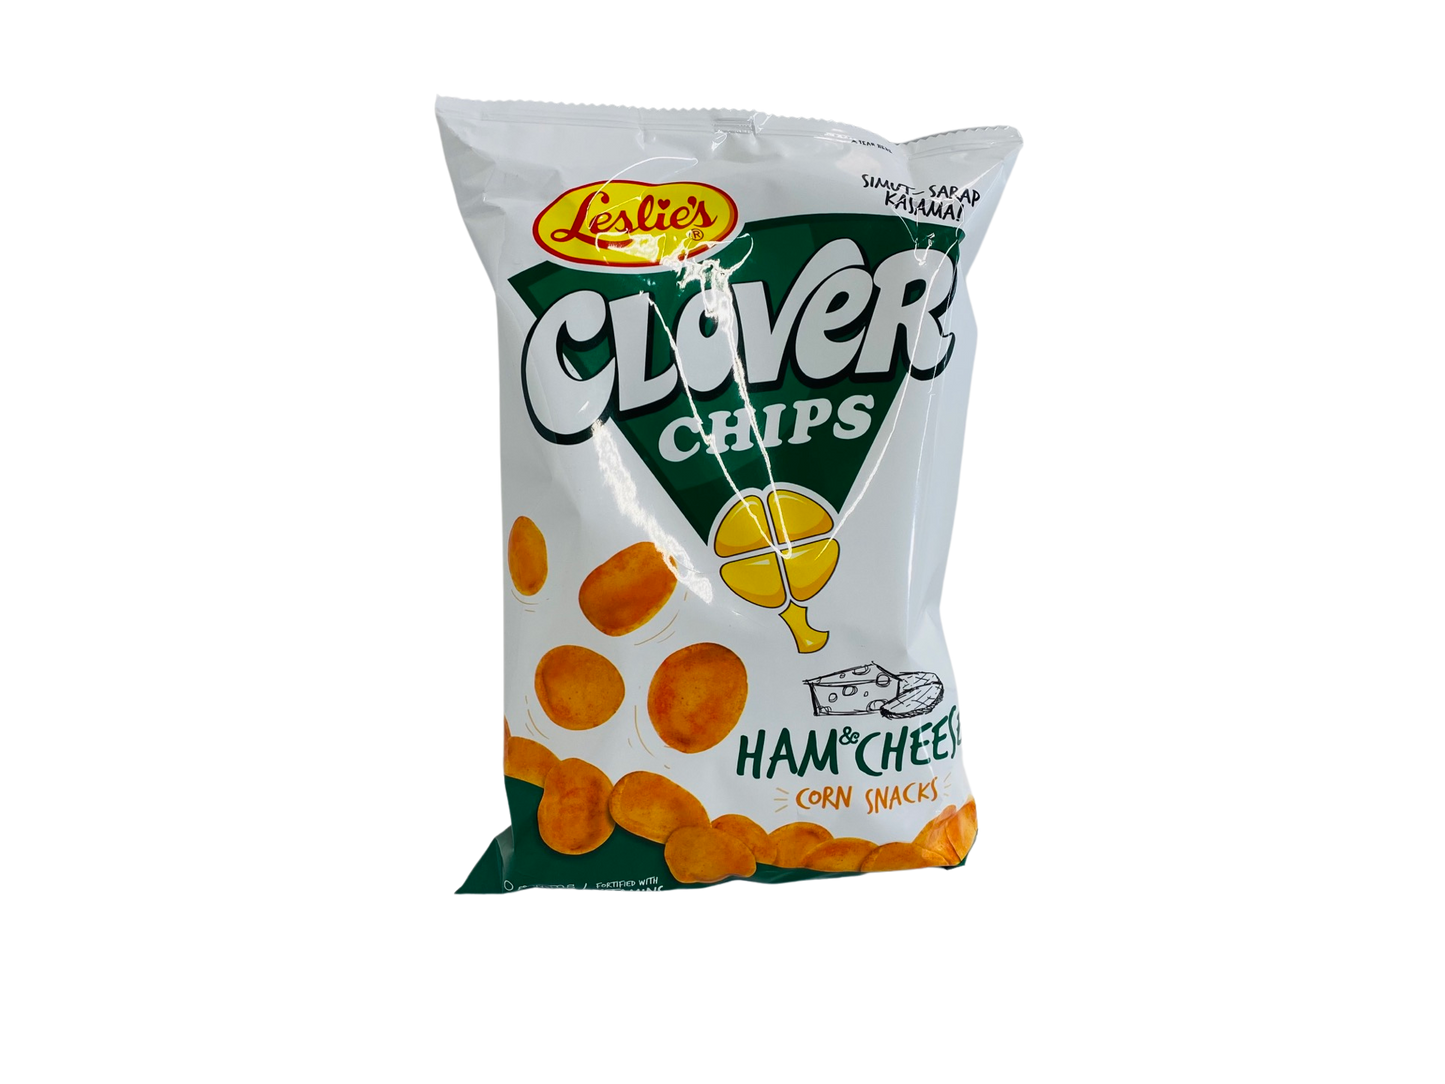 Leslie's Clover Chips Ham & Cheese Corn Snack 85g